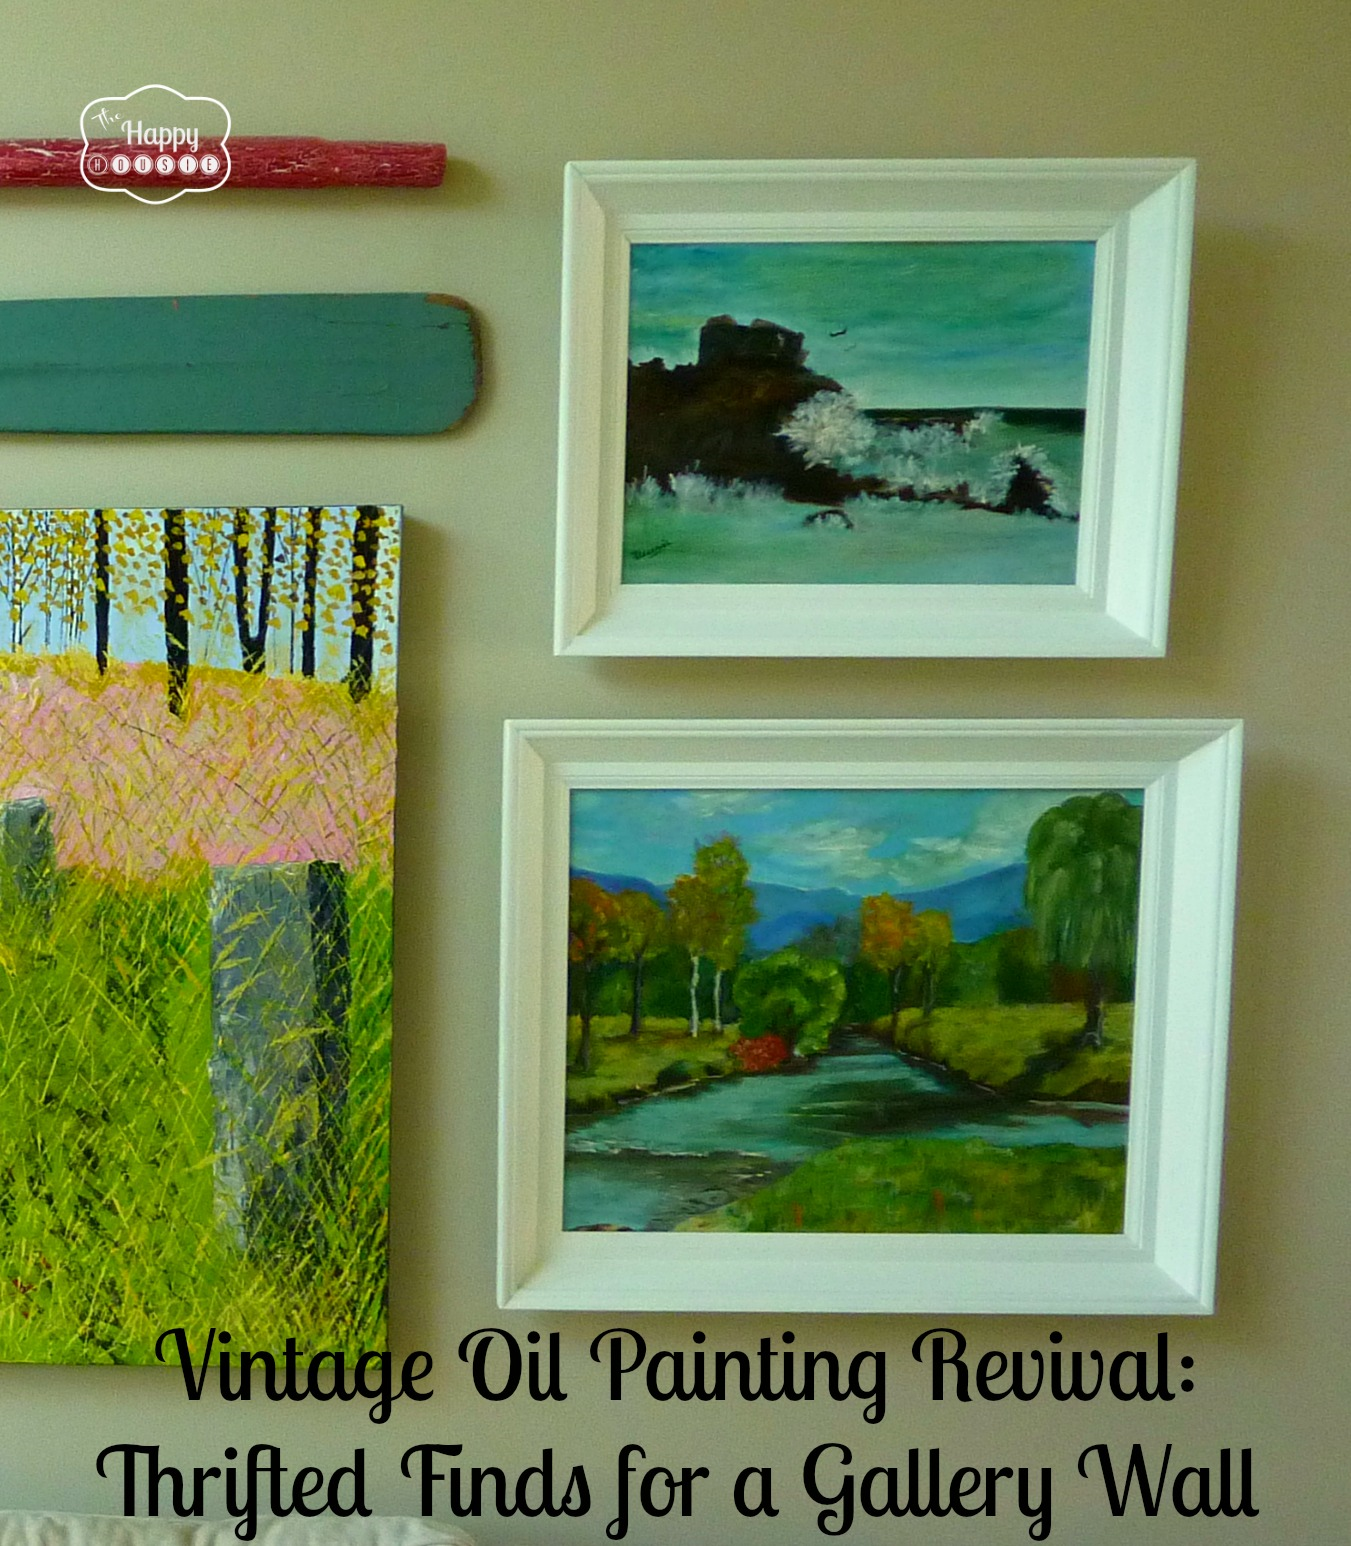 Vintage Oil Painting Revival: Thrifted Finds for a Gallery Wall